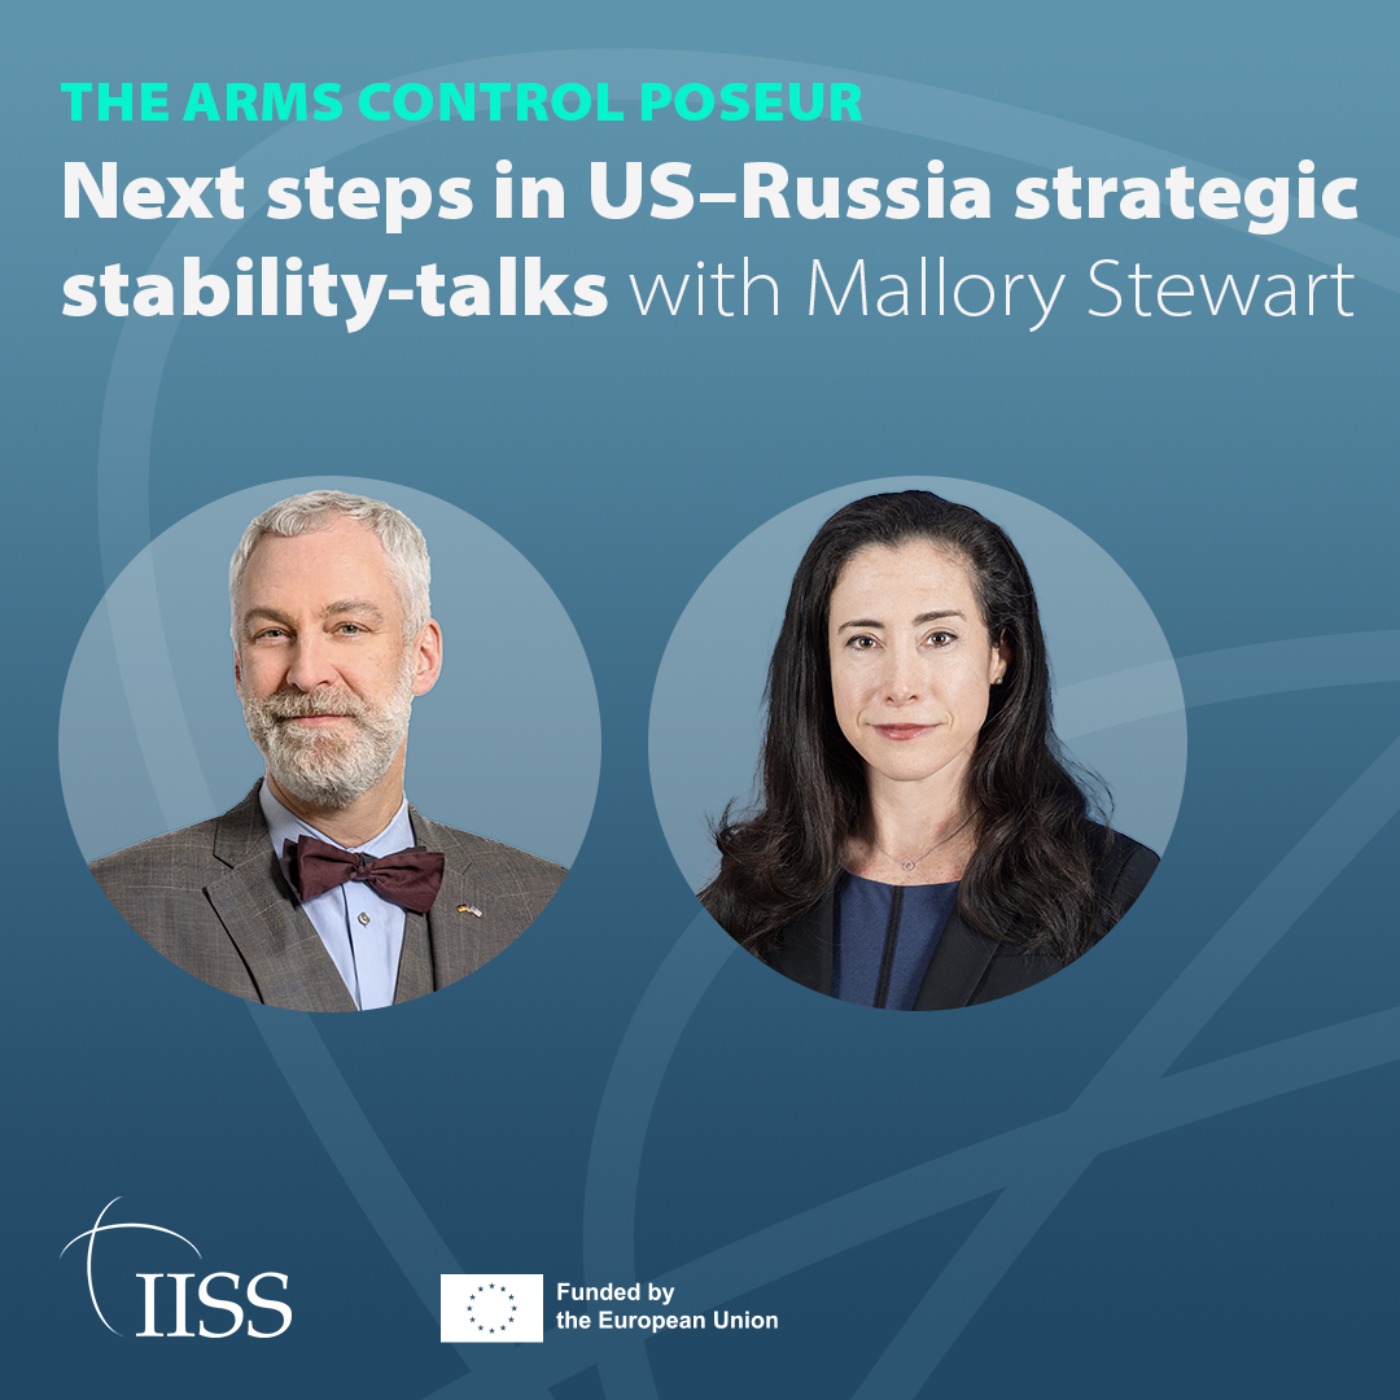 Next steps in US-Russia strategic stability-talks with Mallory Stewart